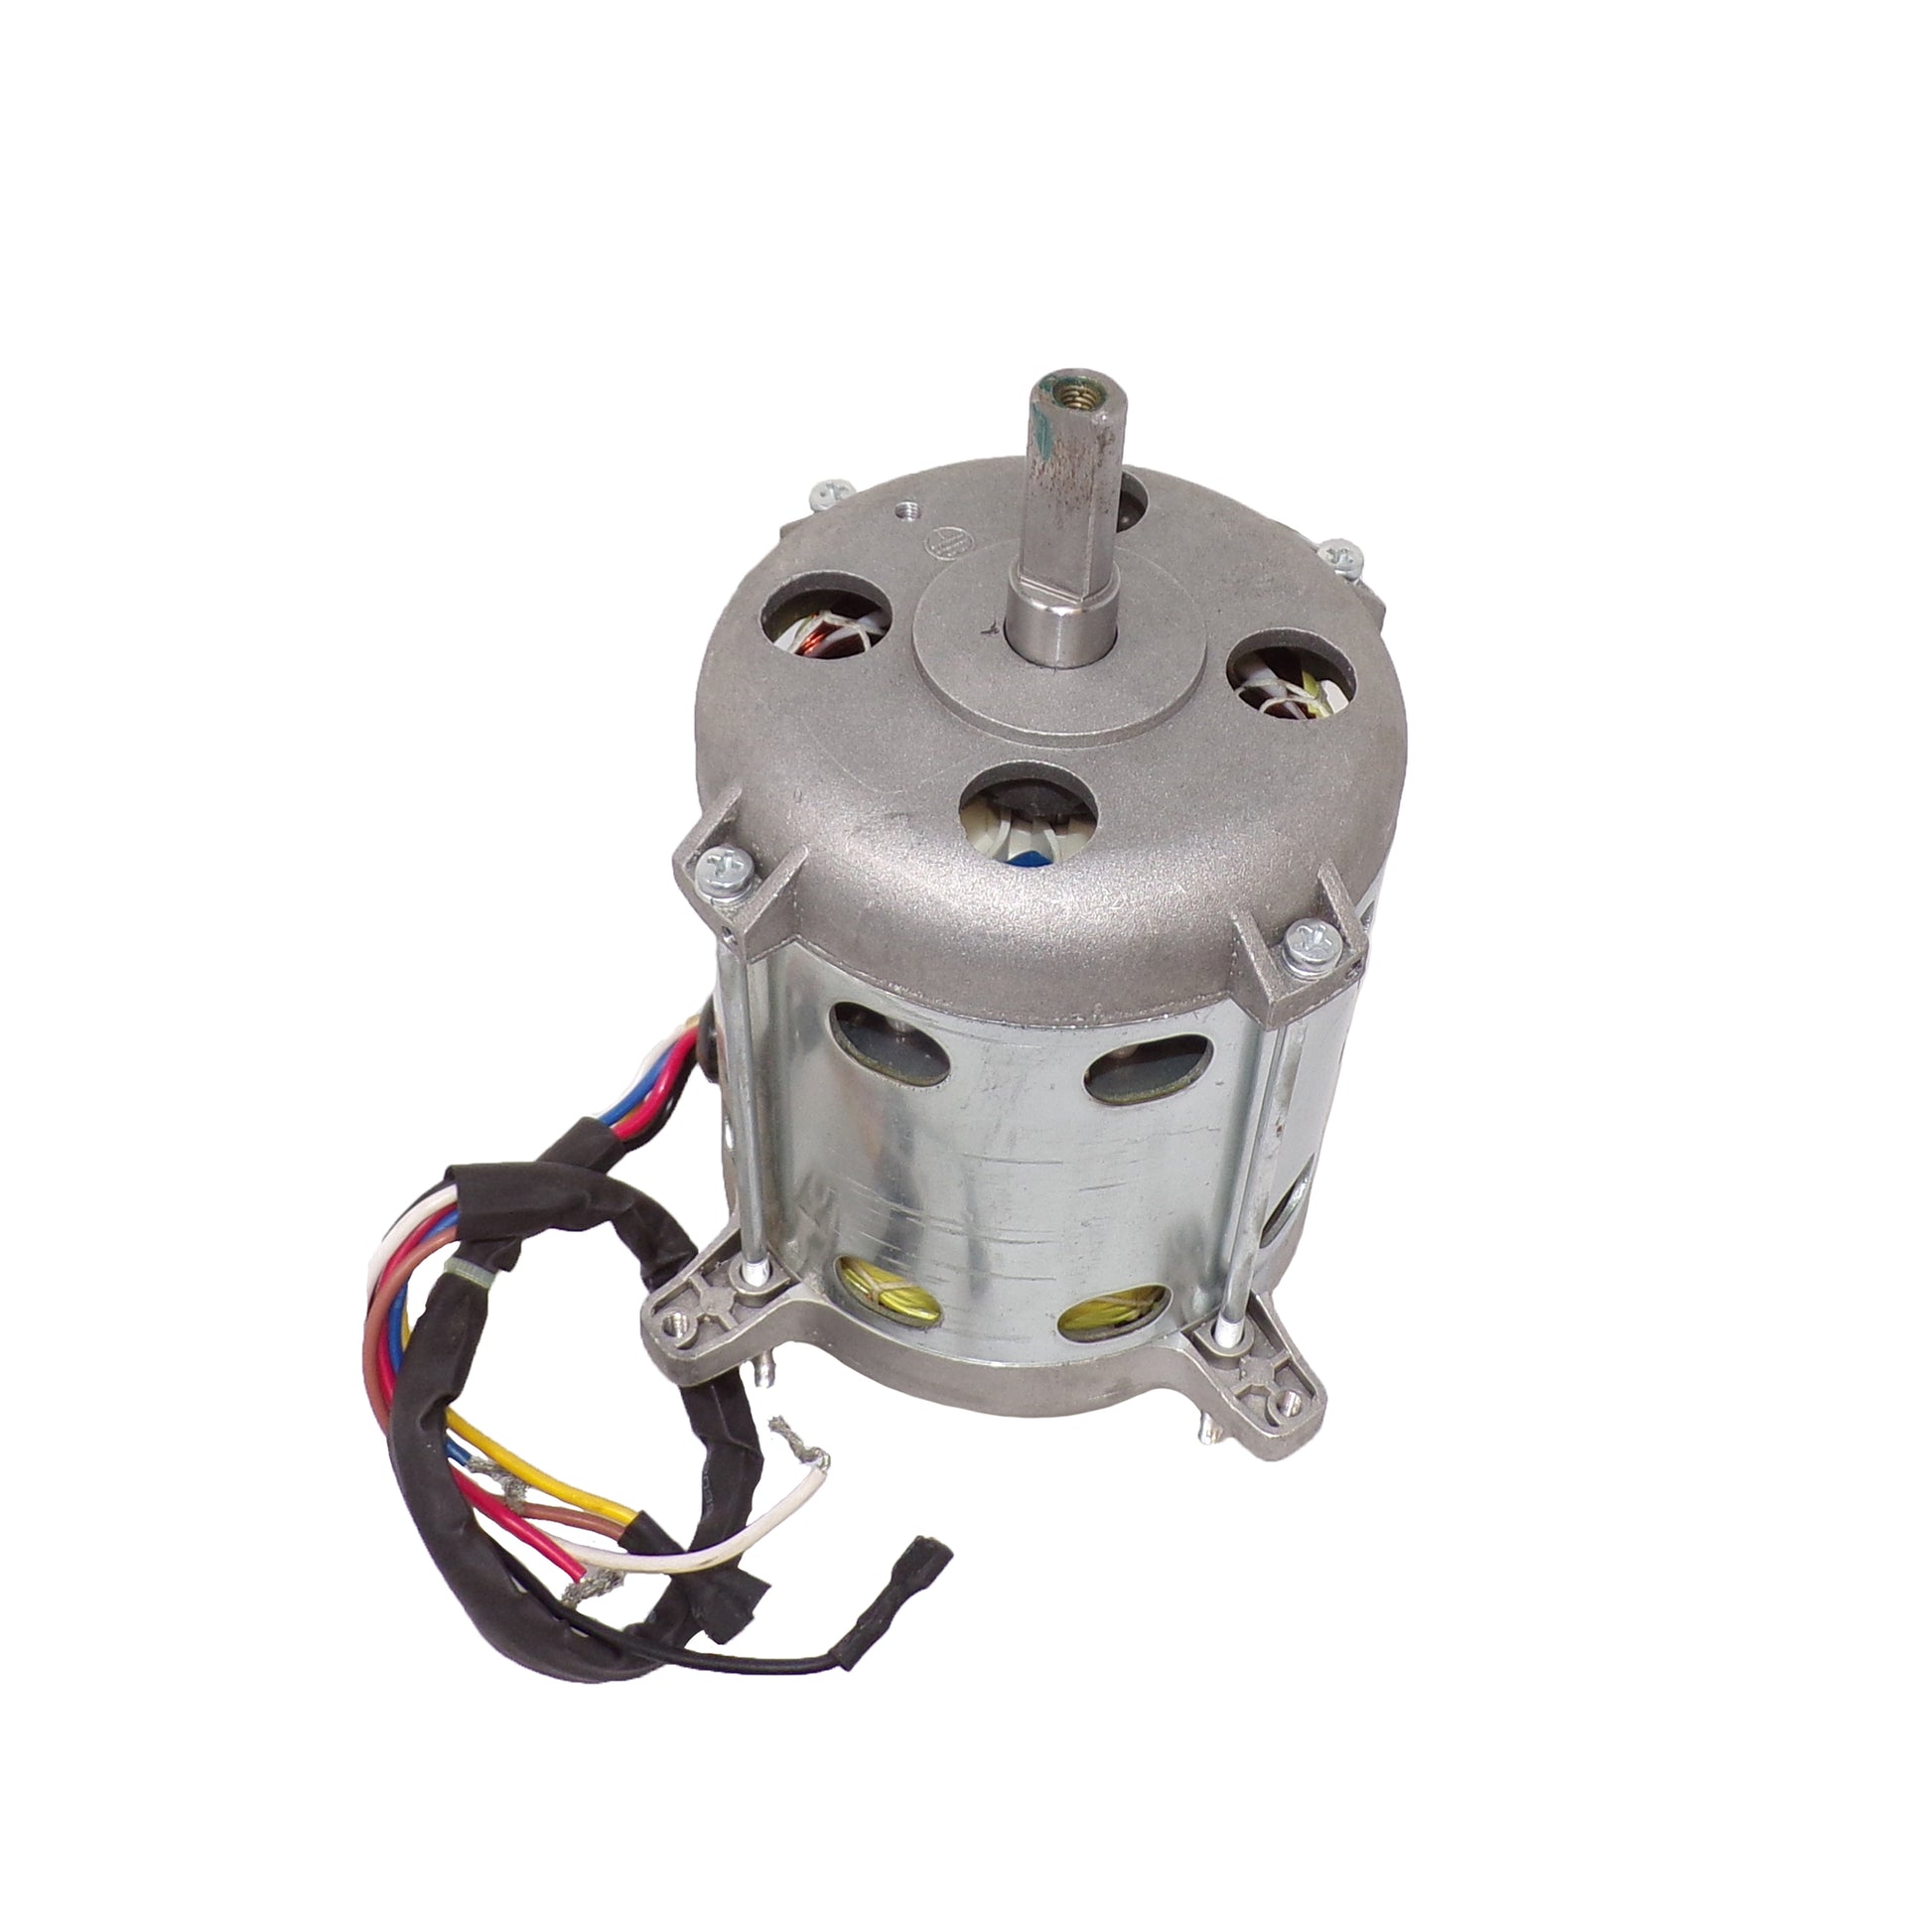 Motor for 400-Series Air Mover